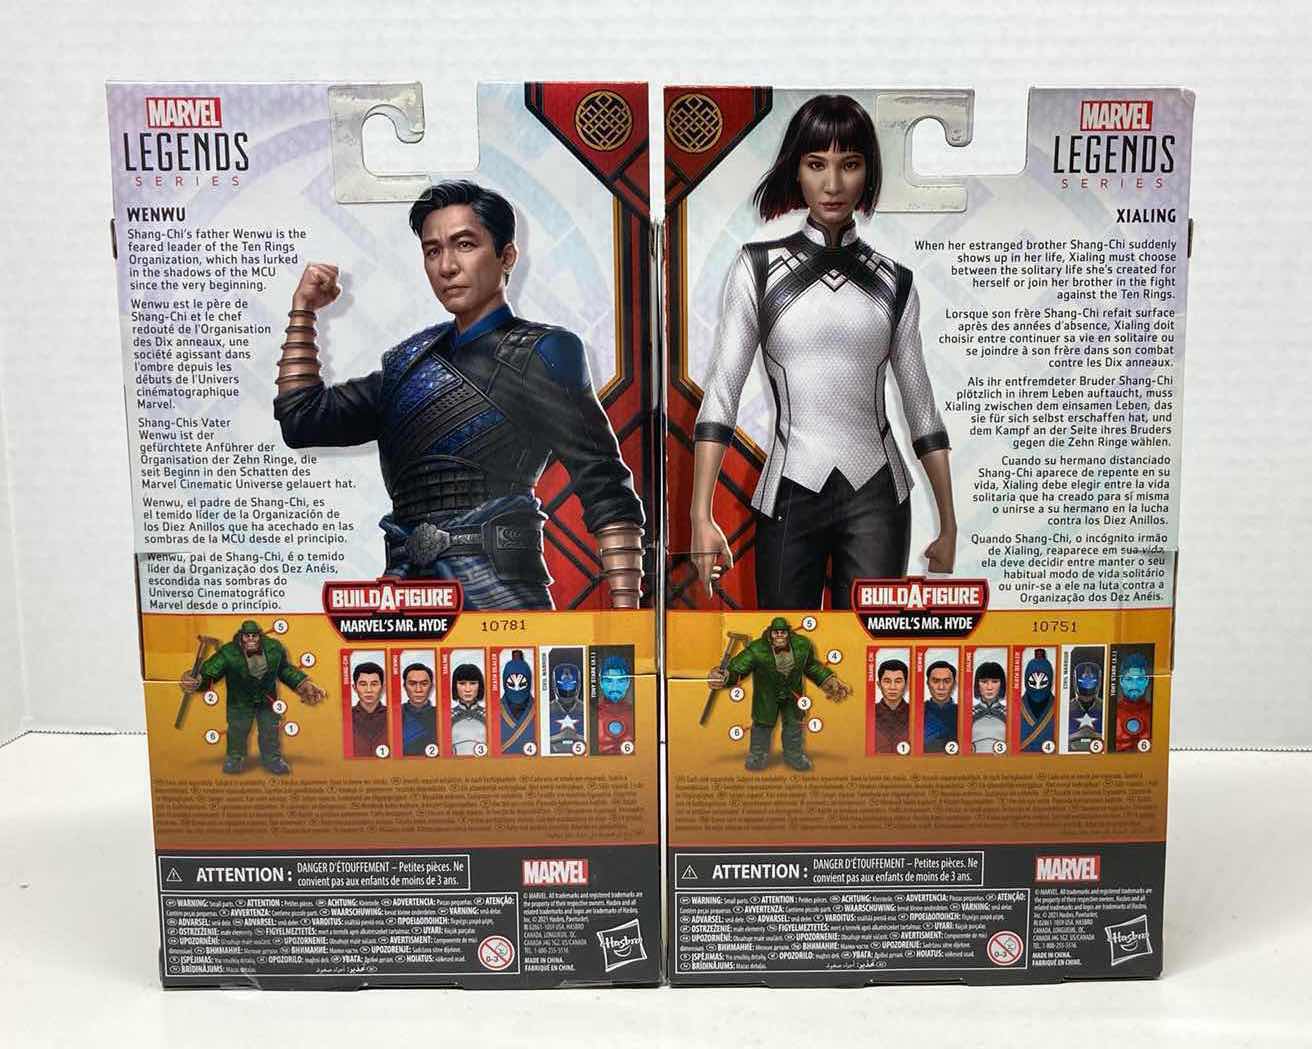 Photo 4 of NEW MARVEL LEGENDS SERIES SHANG-CHI & THE LEGEND OF THE TEN RINGS 3-PACK ACTION FIGURES, “WENWU” (1) & “XIALING” (2)